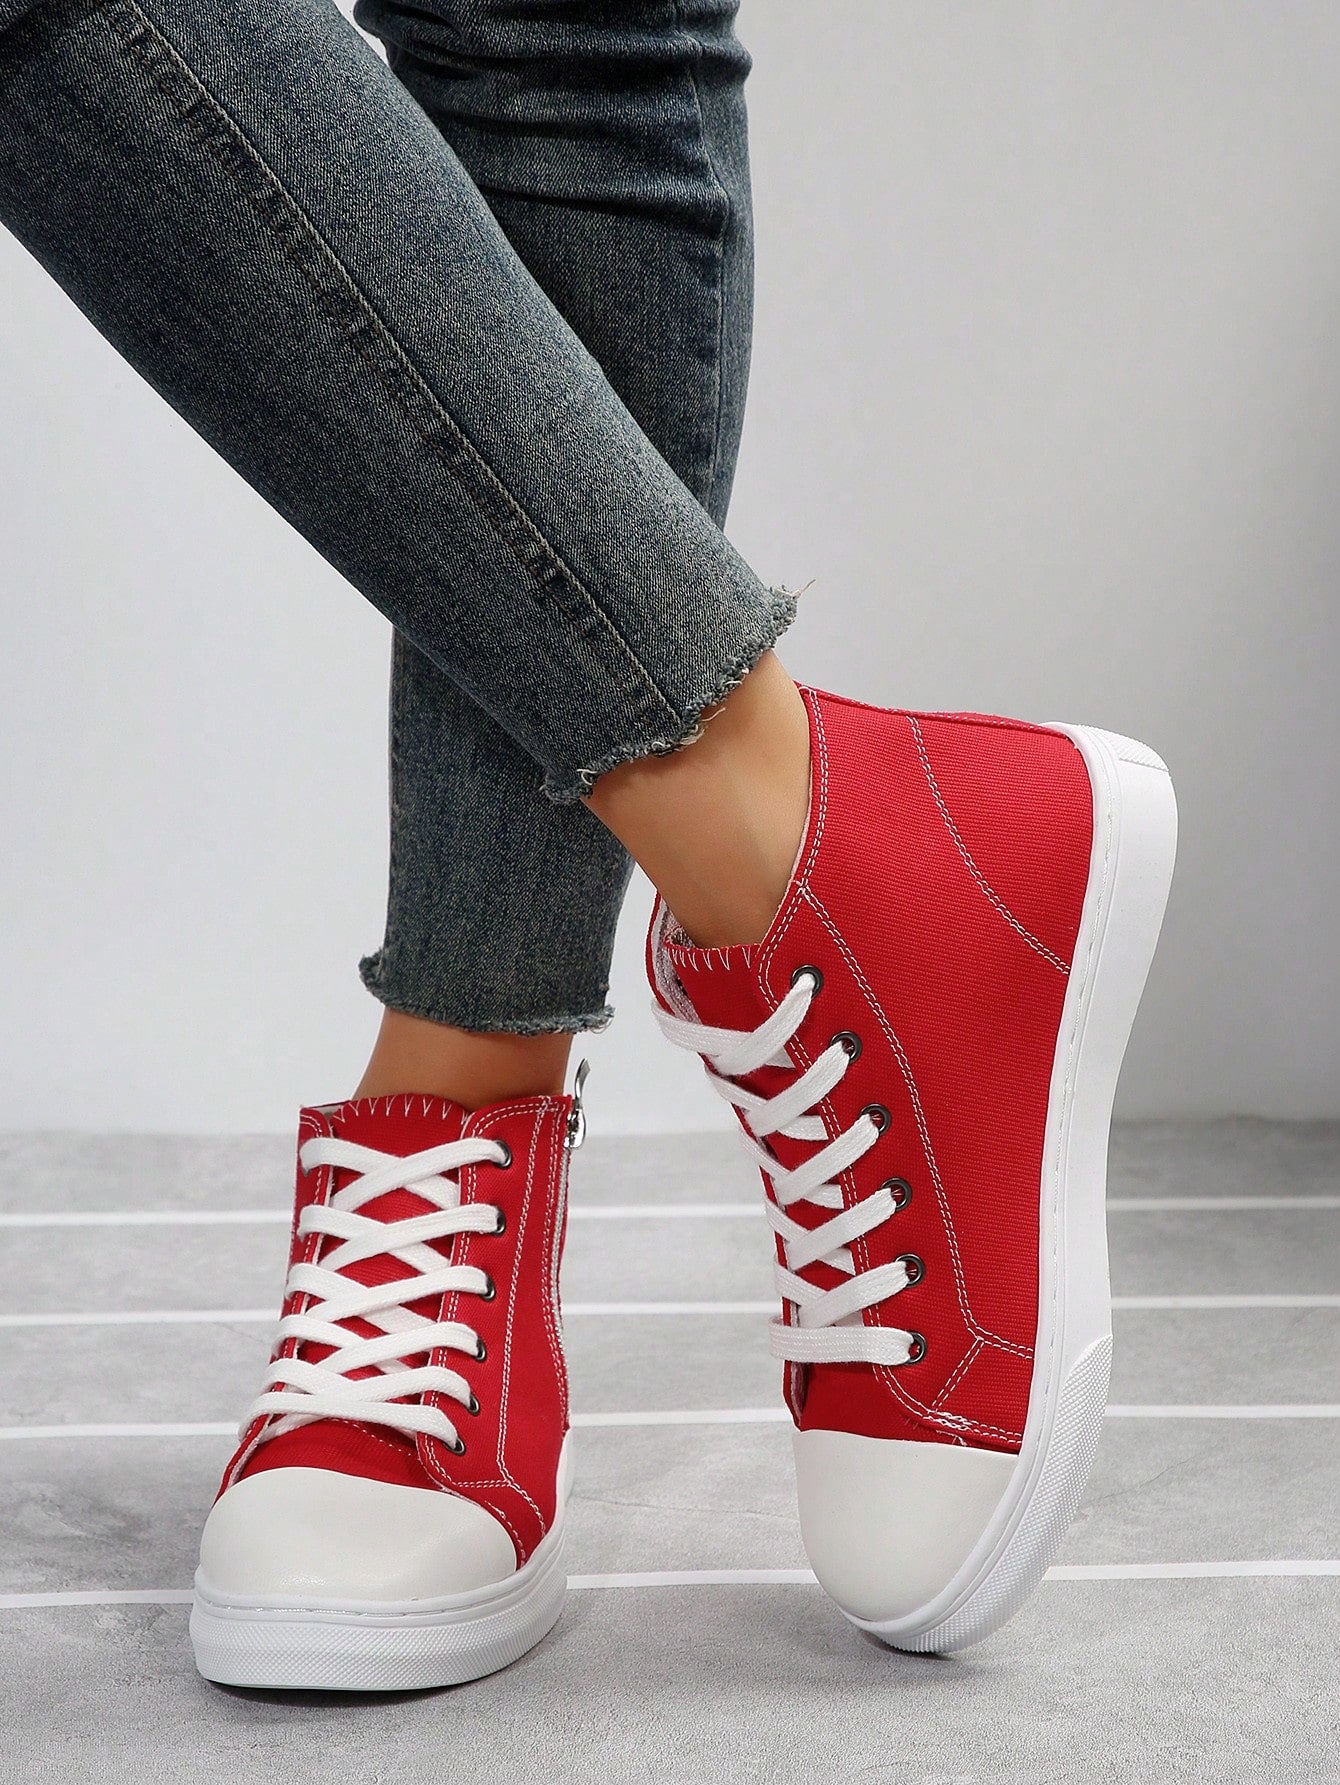 Women Fashionable Soft Classic Round Toe Lace-Up Canvas High-Top Casual Sports Shoes For All Seasons-Red-3